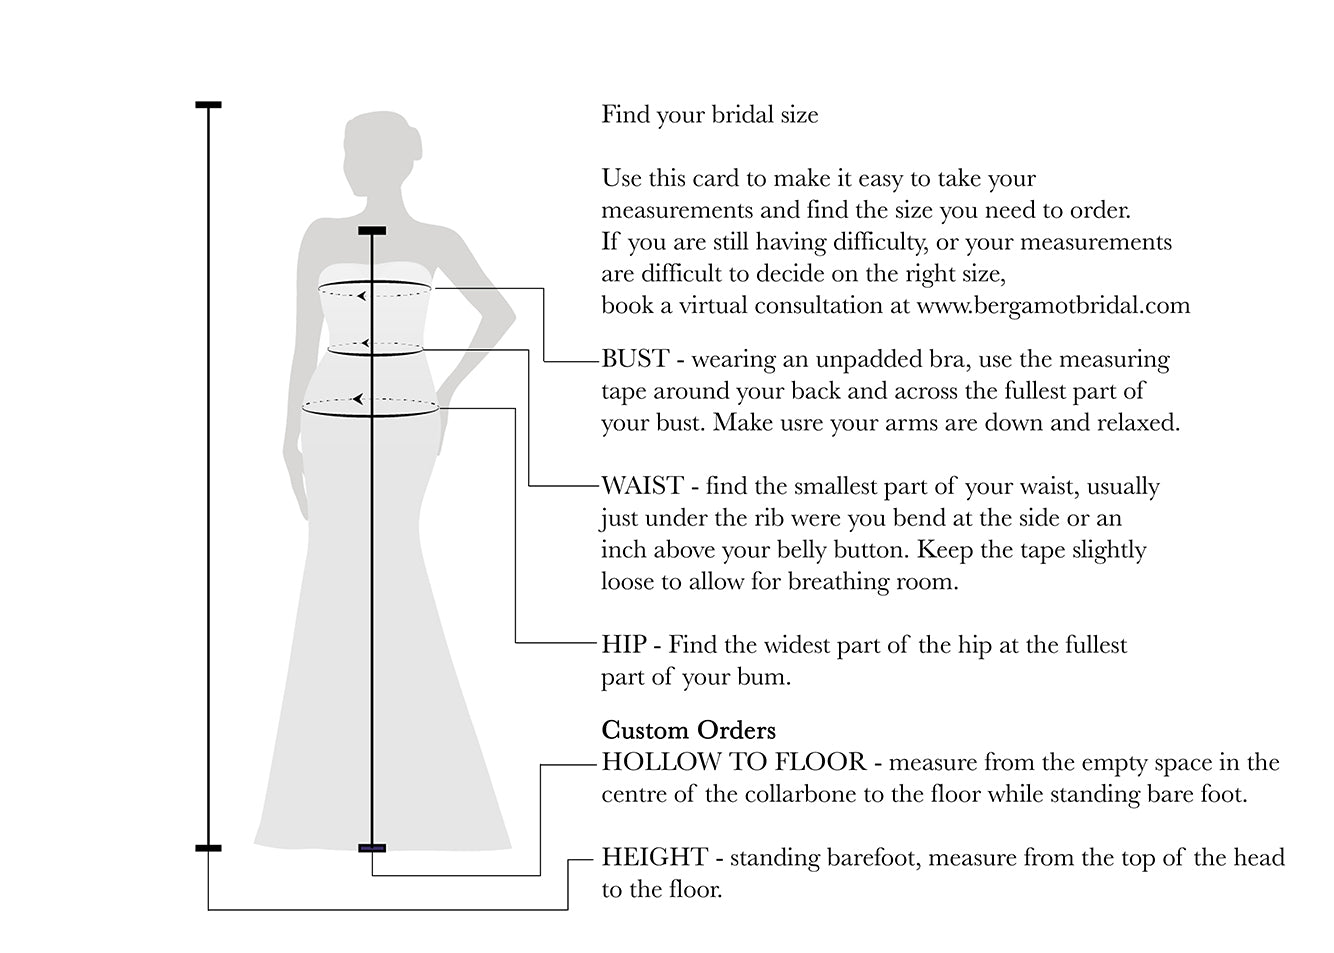 A diagram showing the measurements of the Plunging V-neck Lace Long Sleeve Bohemian Wedding Gown in Bergamot Bridal bridal shops in London.